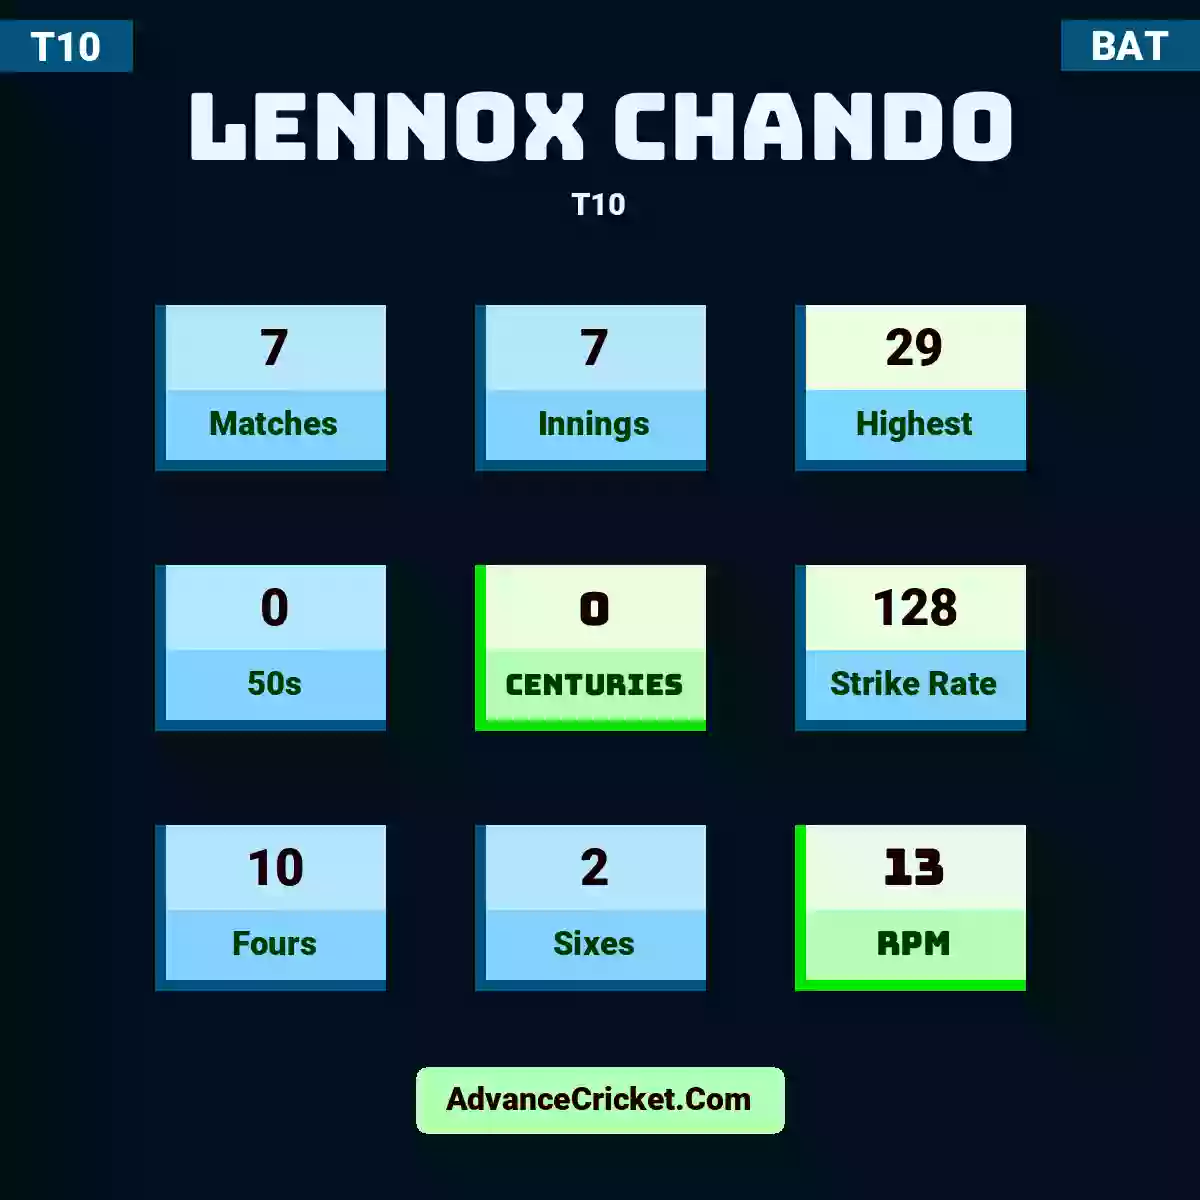 lennox Chando T10 , lennox Chando played 7 matches, scored 29 runs as highest, 0 half-centuries, and 0 centuries, with a strike rate of 128. L.Chando hit 10 fours and 2 sixes, with an RPM of 13.